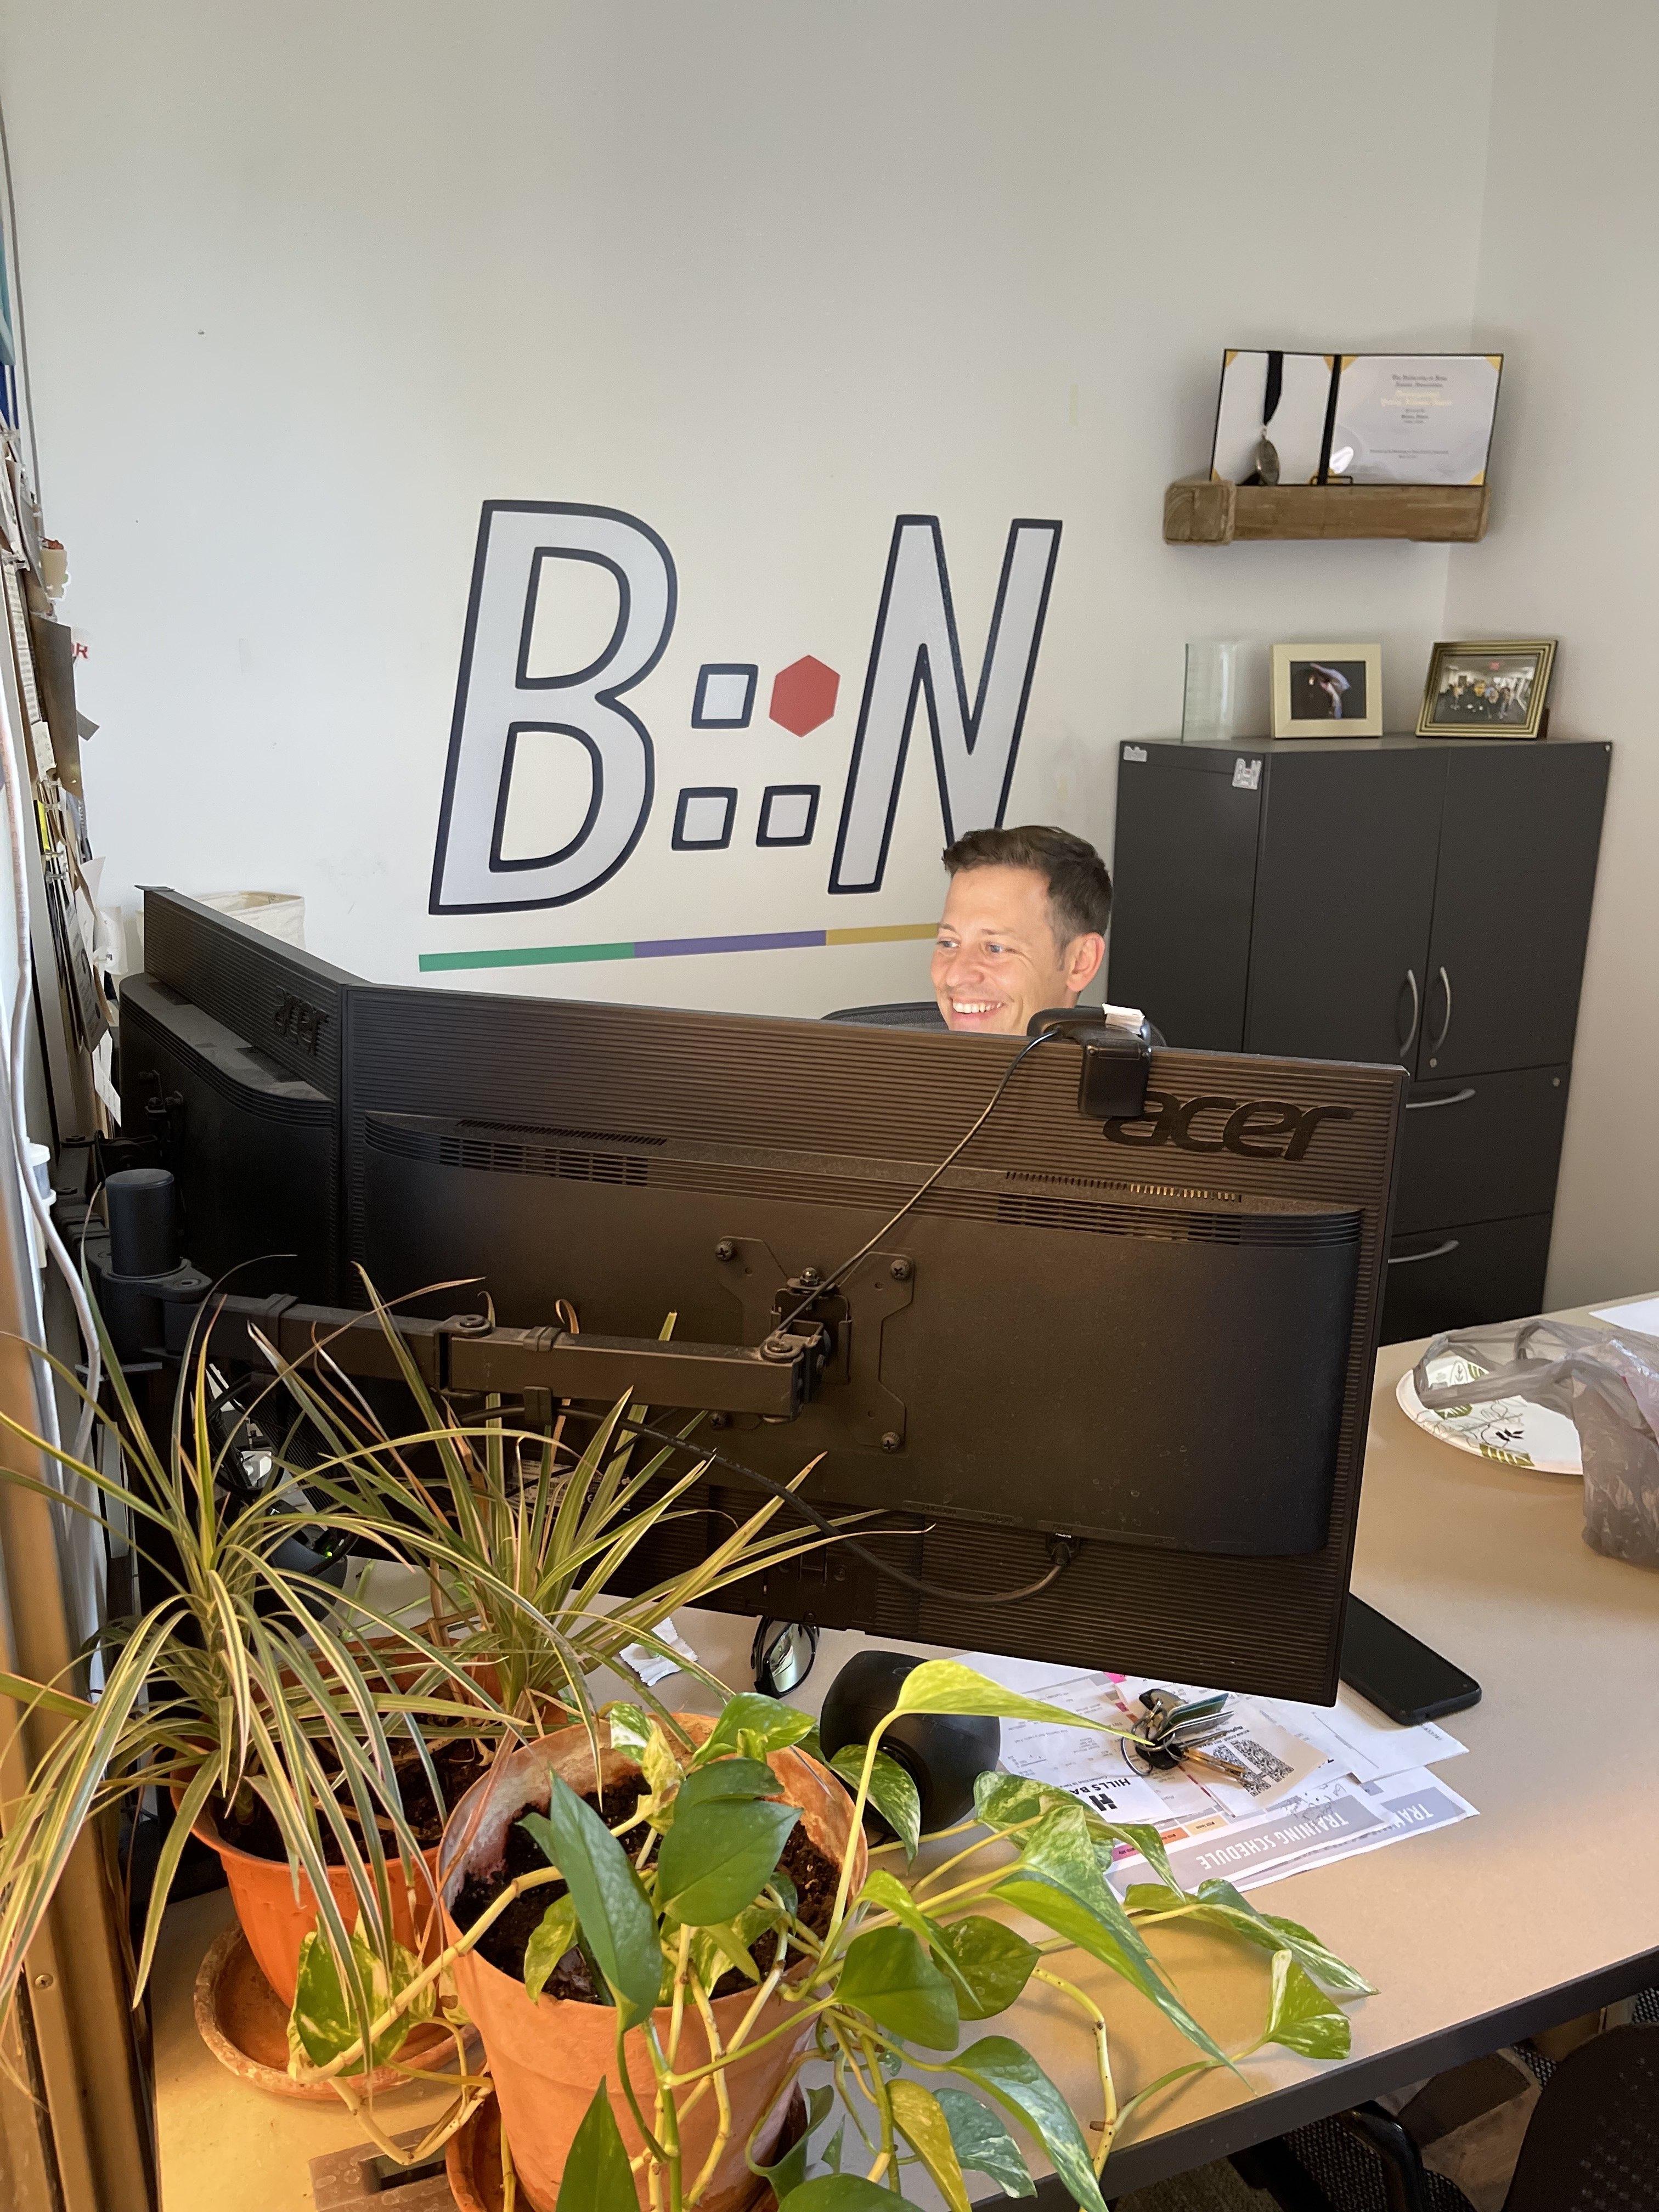 Steve working at his desk smiling with BN logo on the all behind him